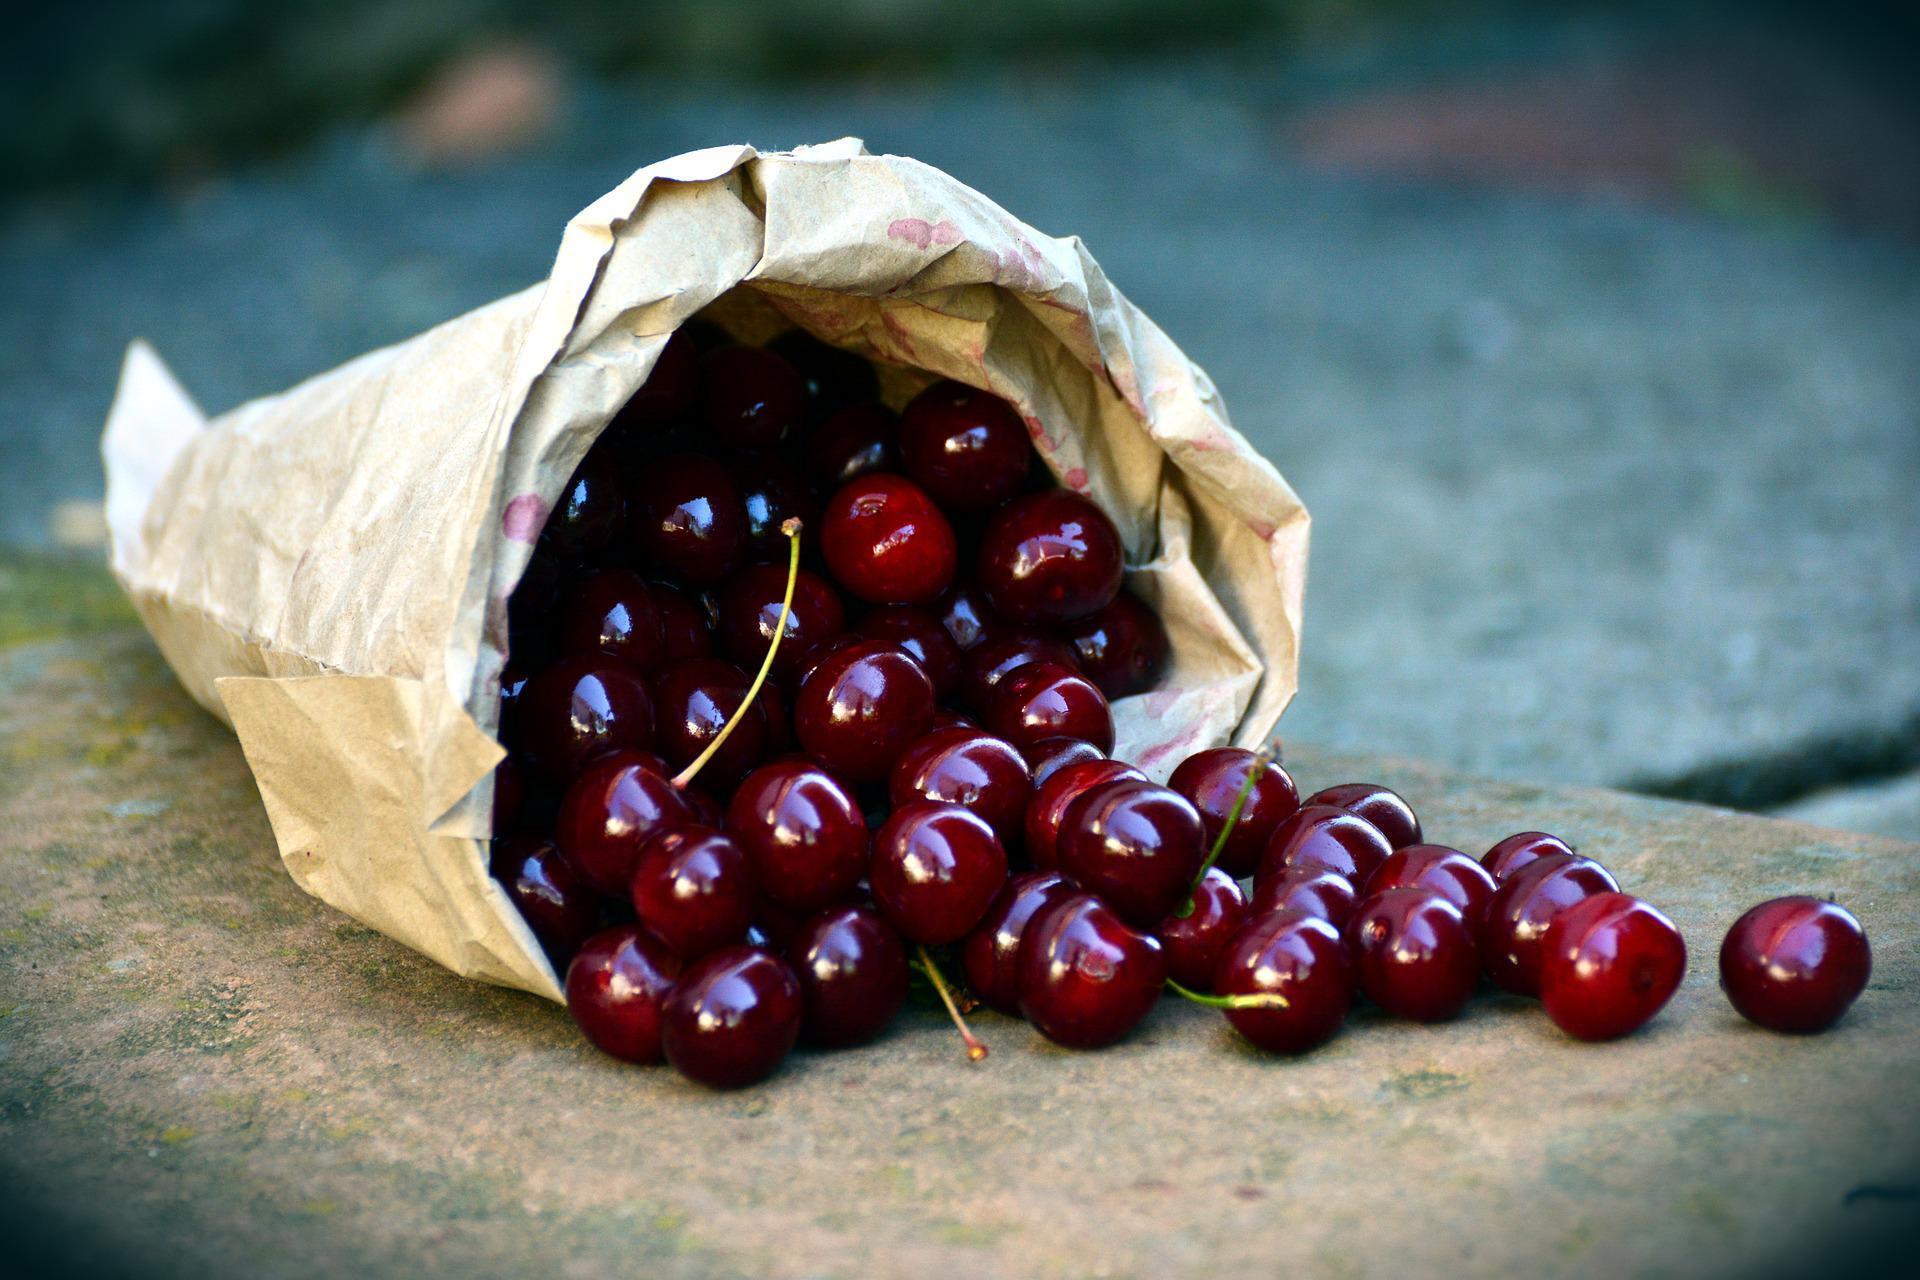 Ripe sweet cherries with pit